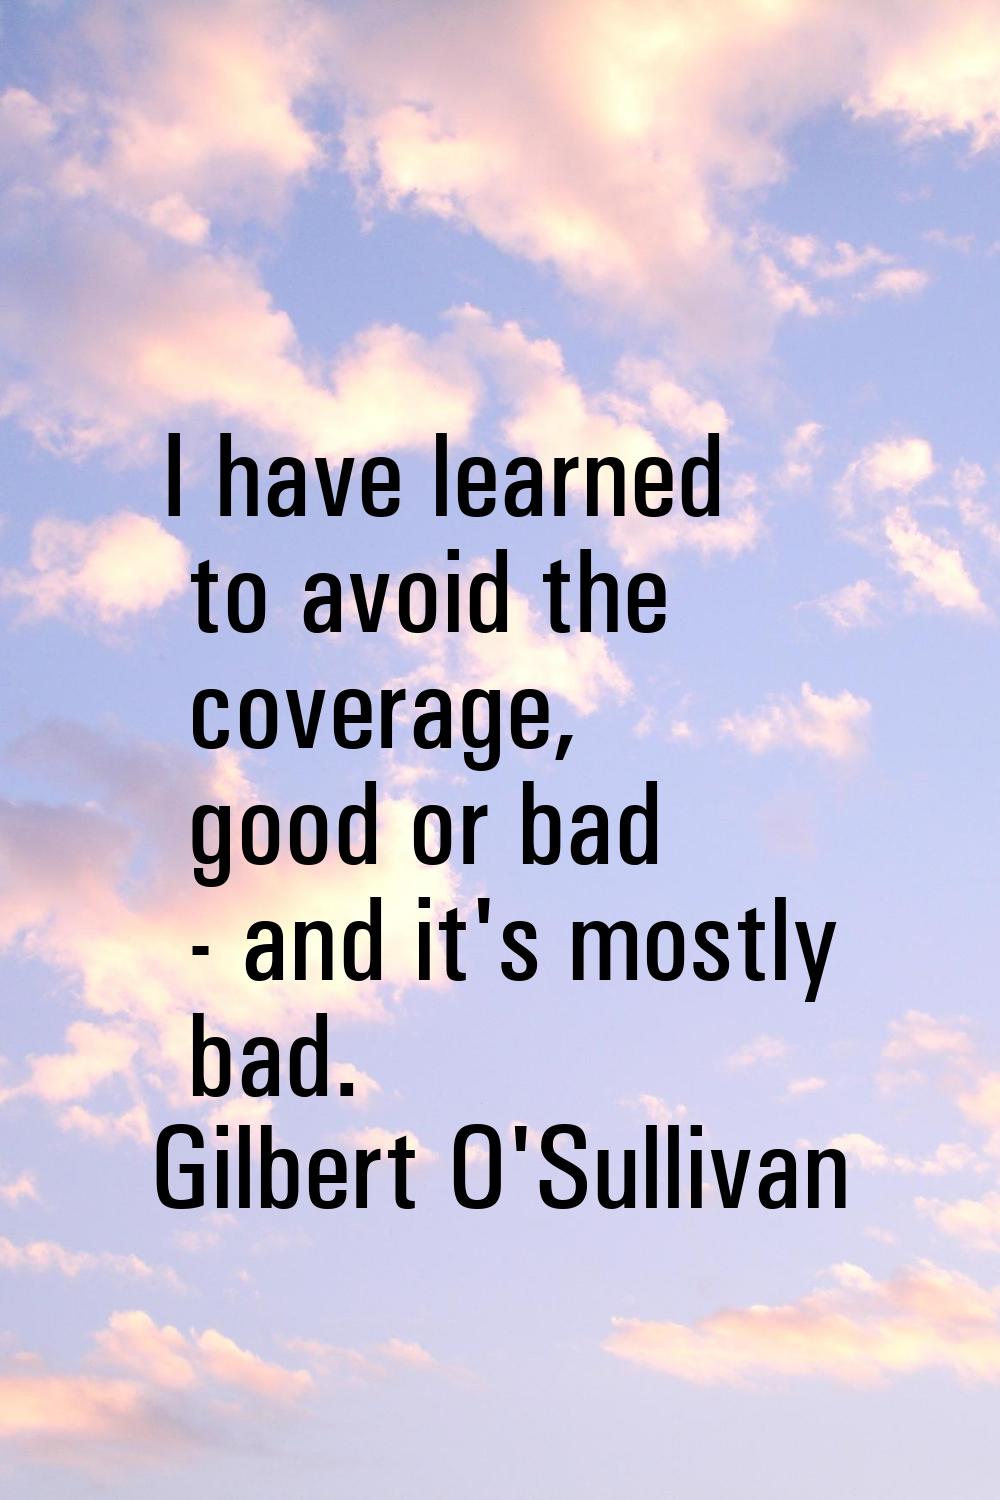 I have learned to avoid the coverage, good or bad - and it's mostly bad.